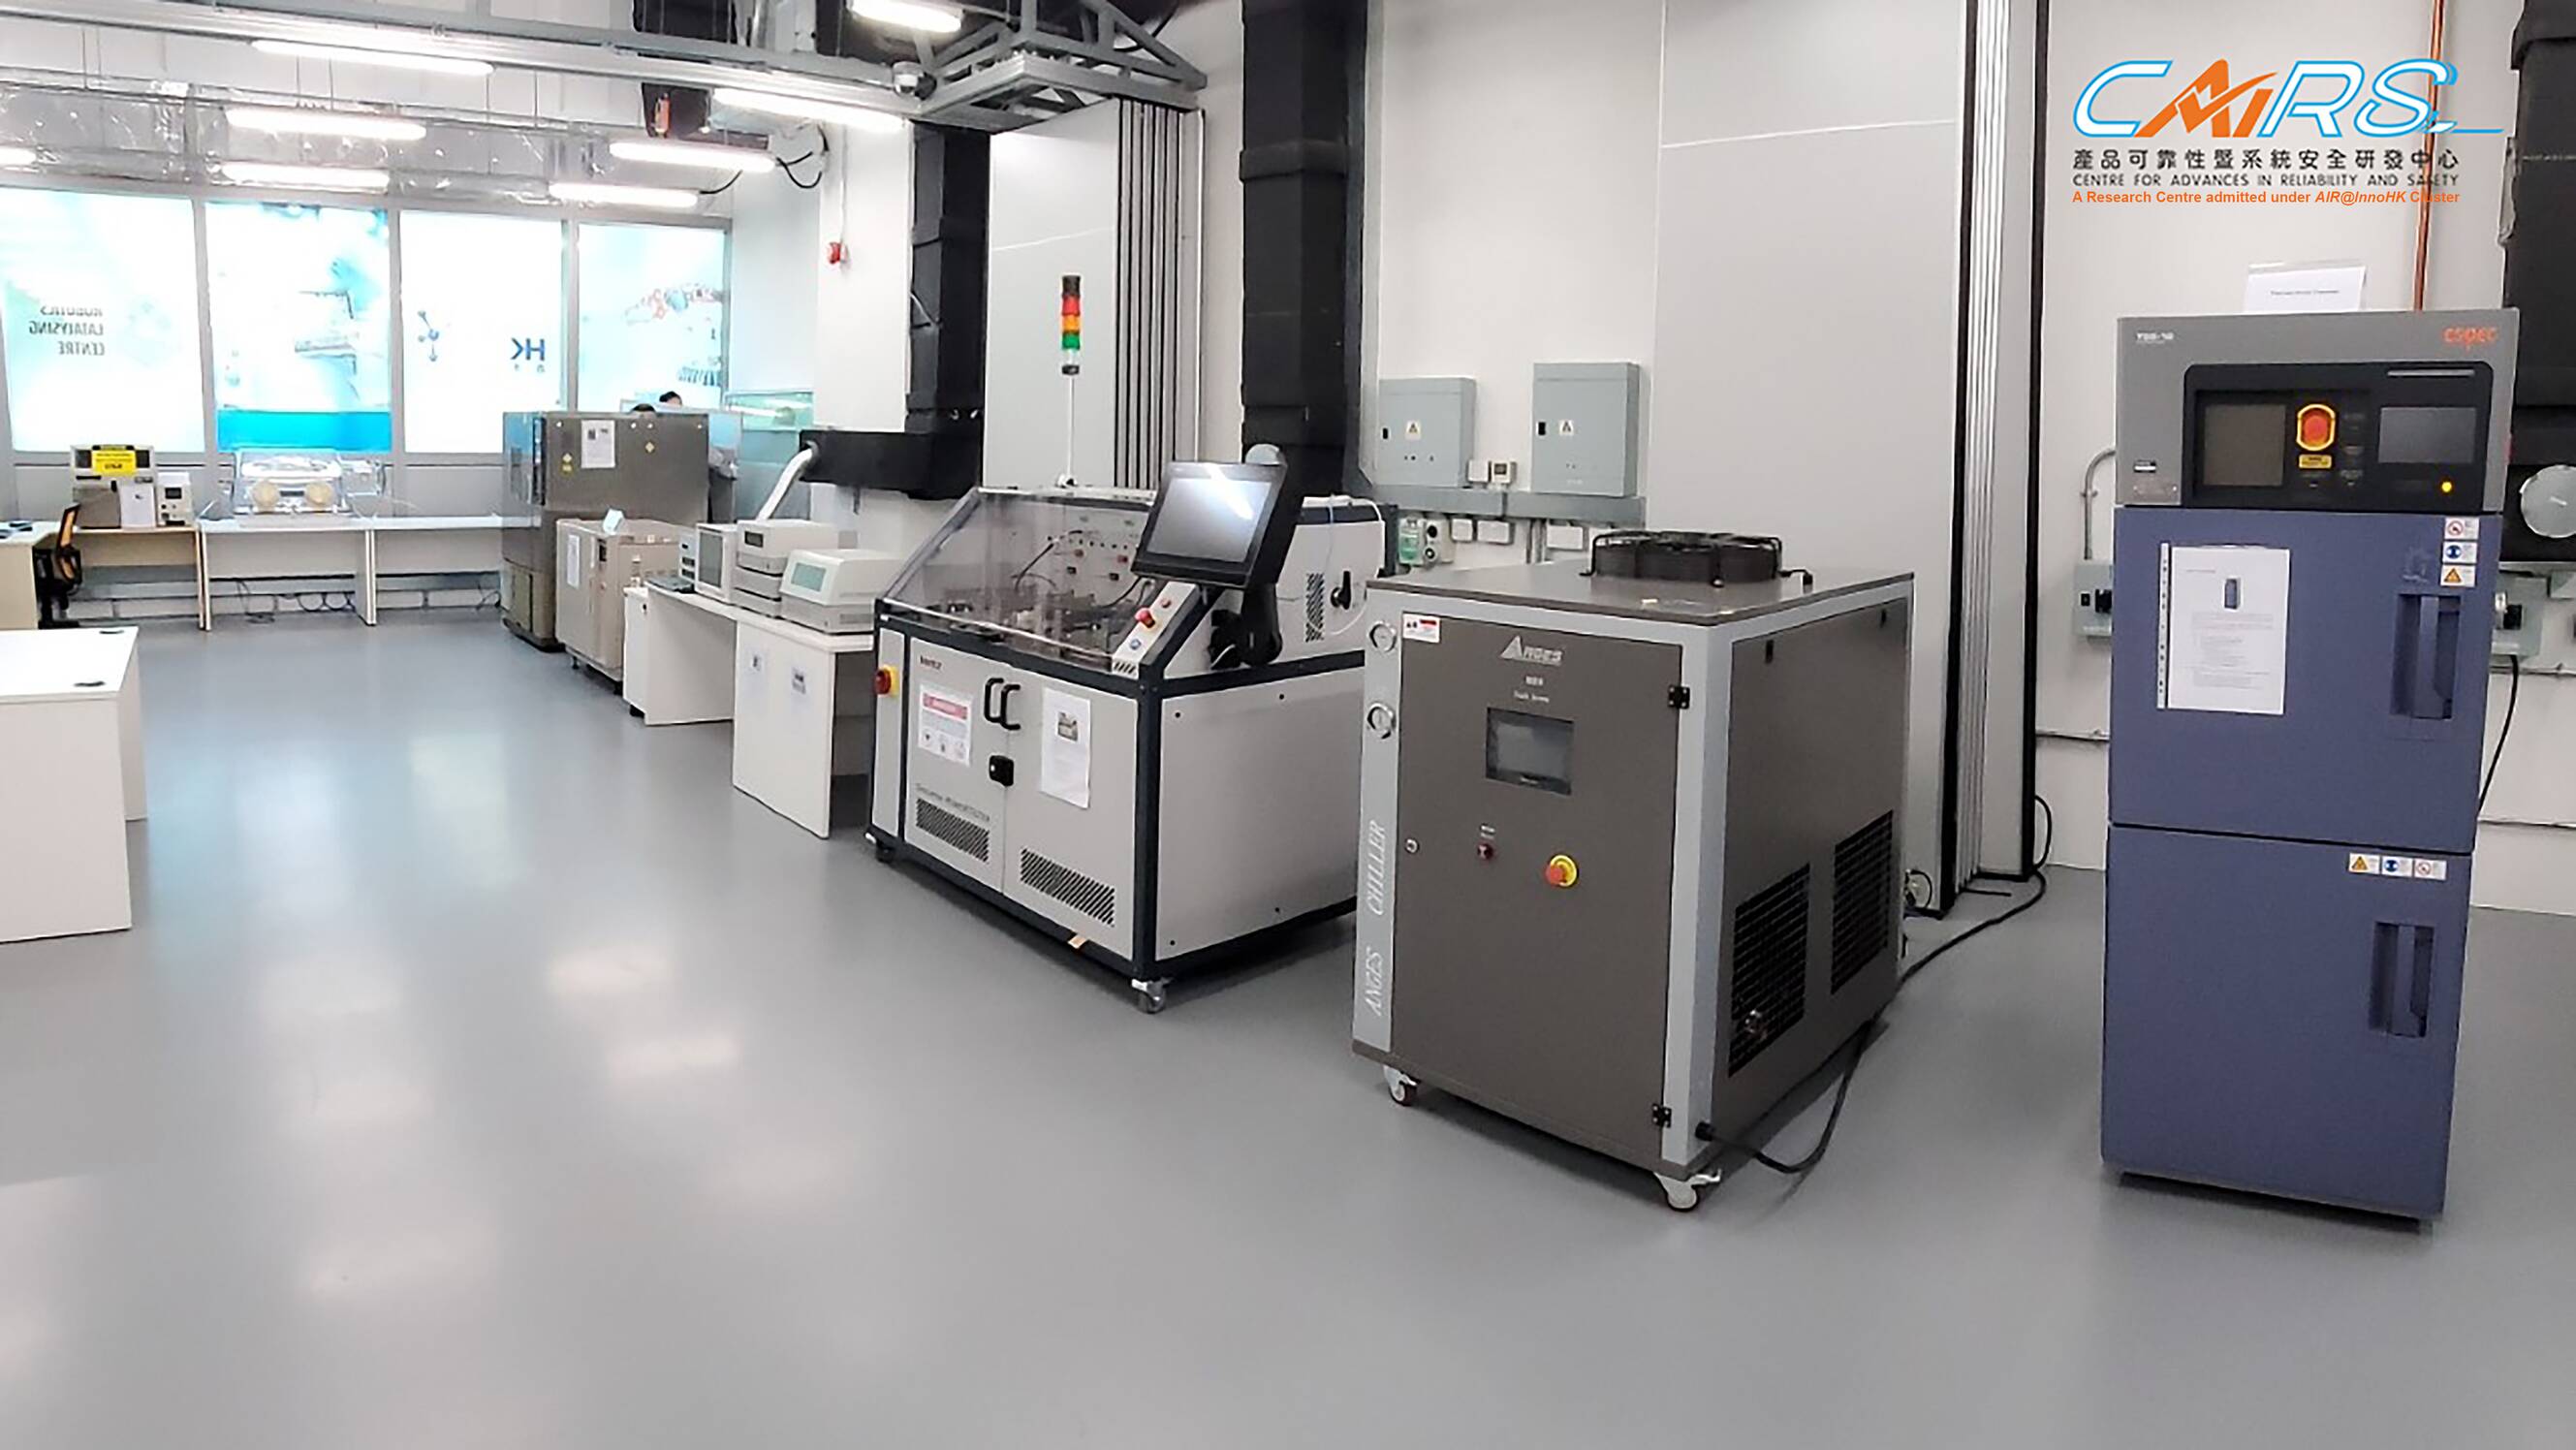 Laboratory of CAiRS installed a variety of advanced equipment for research on product reliability and system safety.